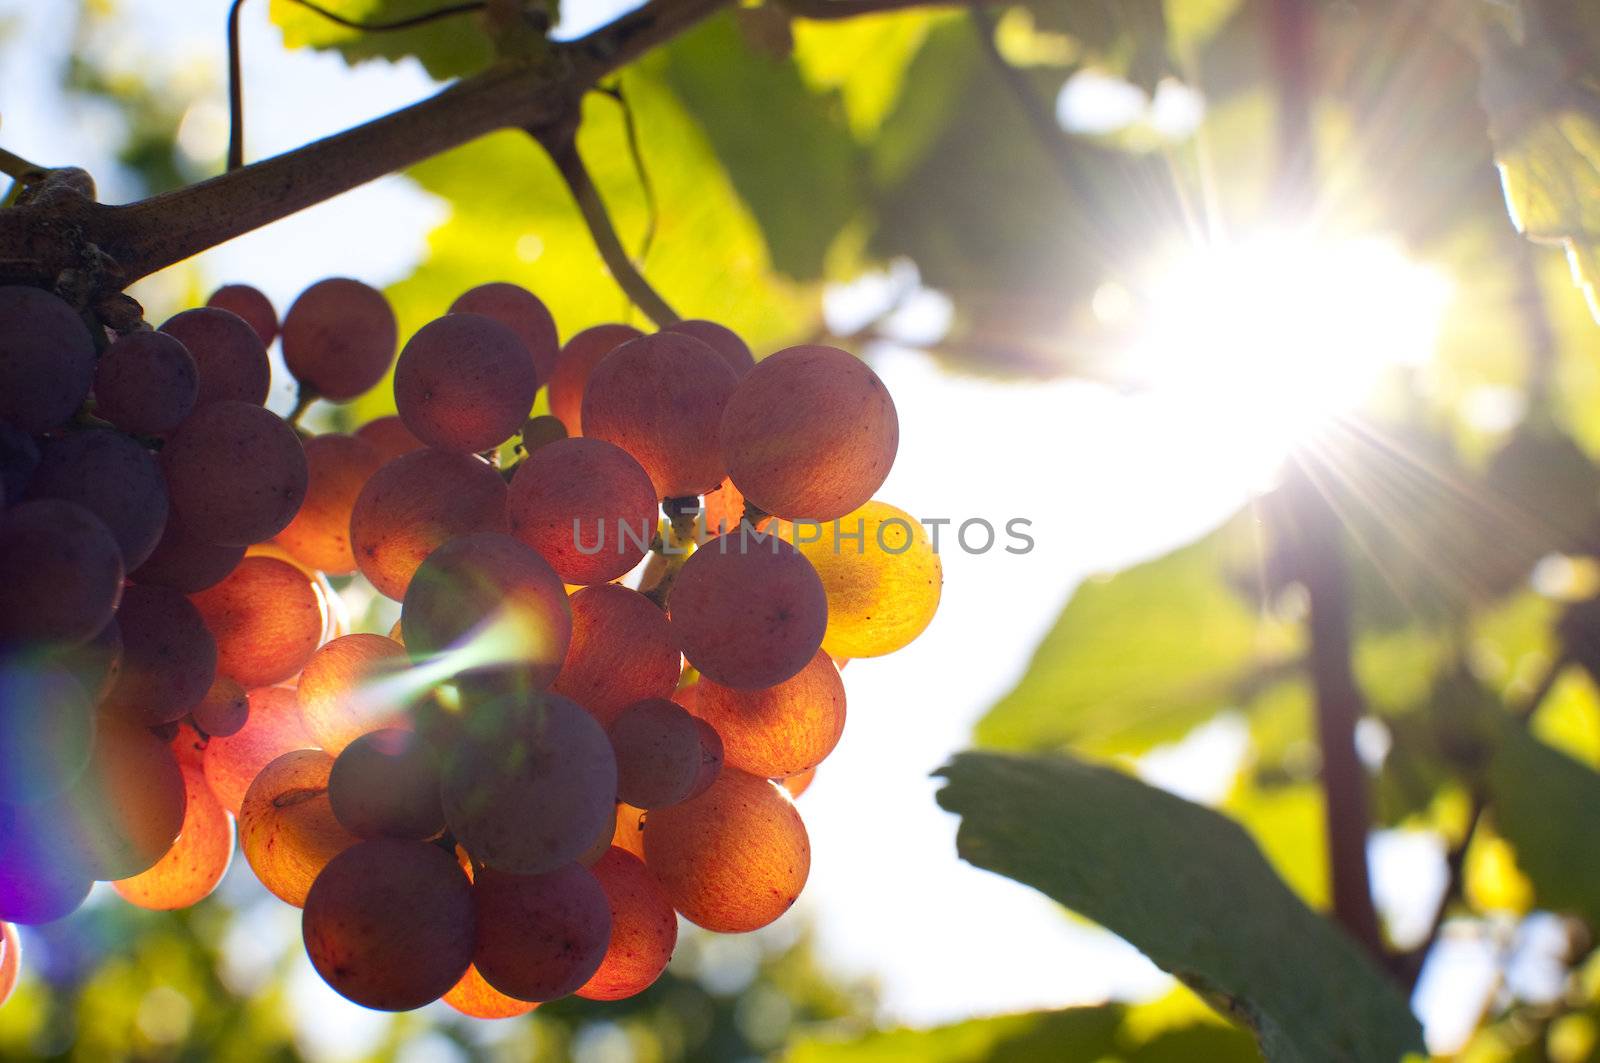 Close-up of a bunch of grapes on grapevine at susnset. Shallow DOF.